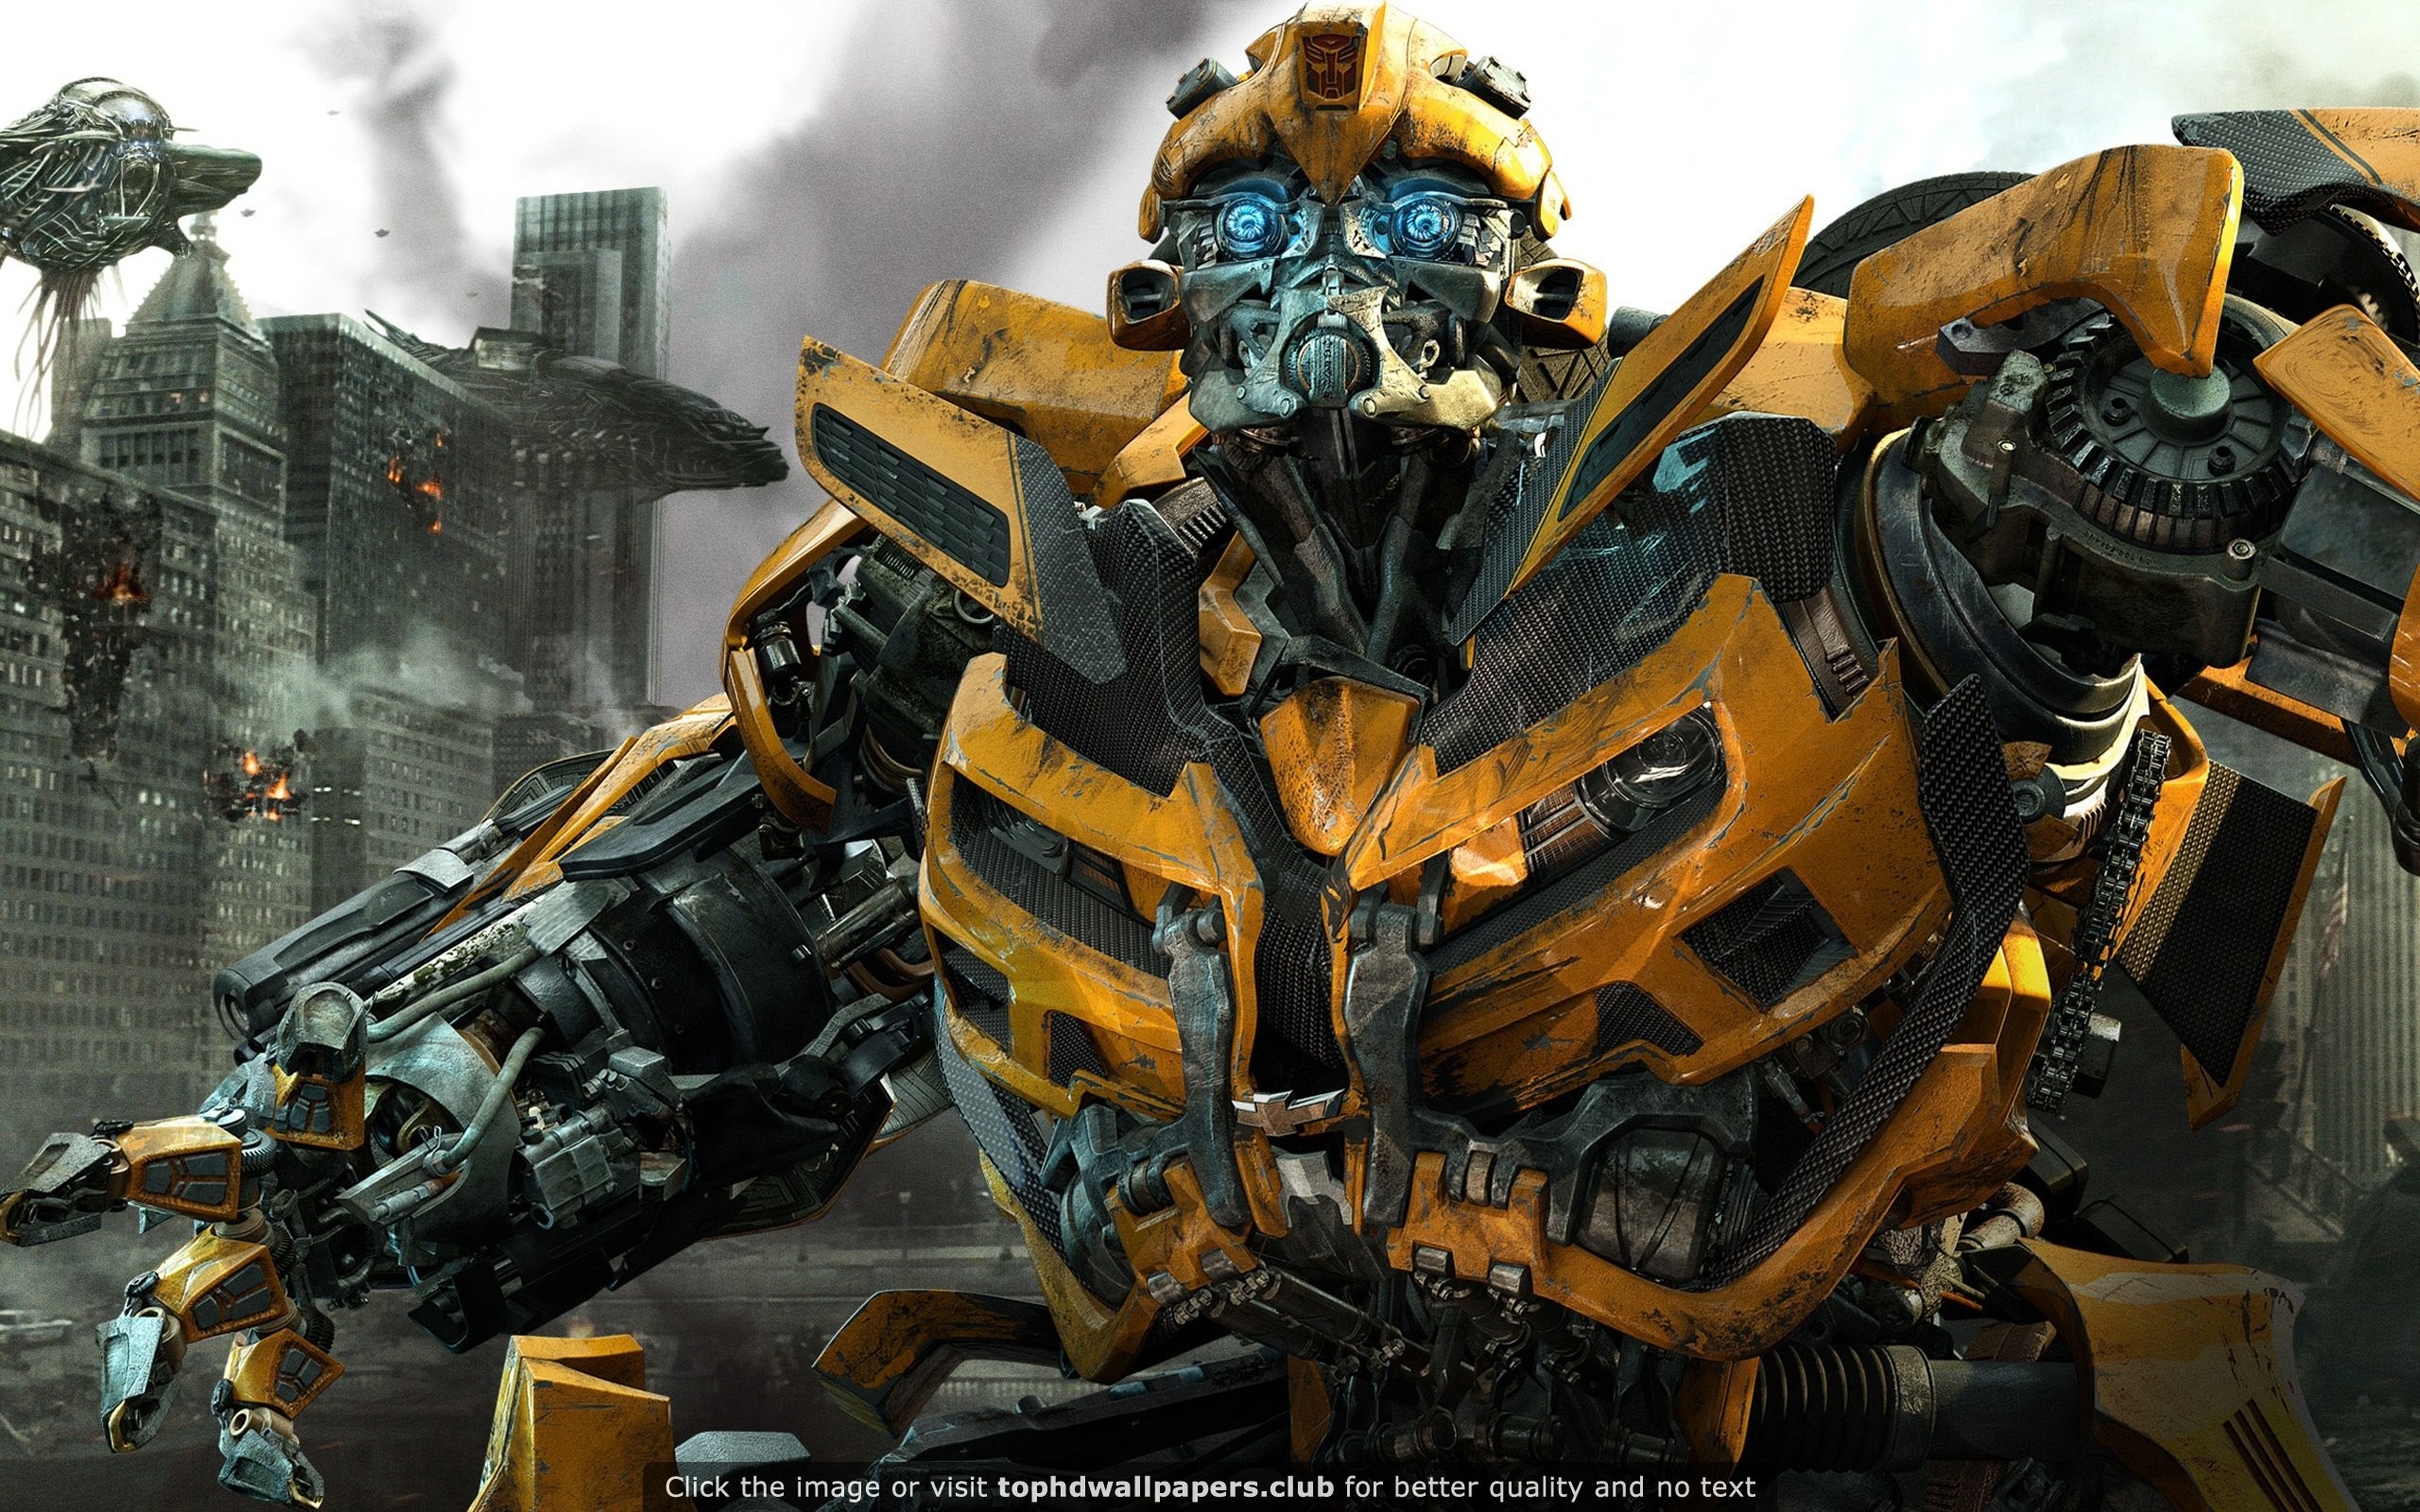 cool transformers wallpapers,action adventure game,mecha,transformers,fictional character,pc game